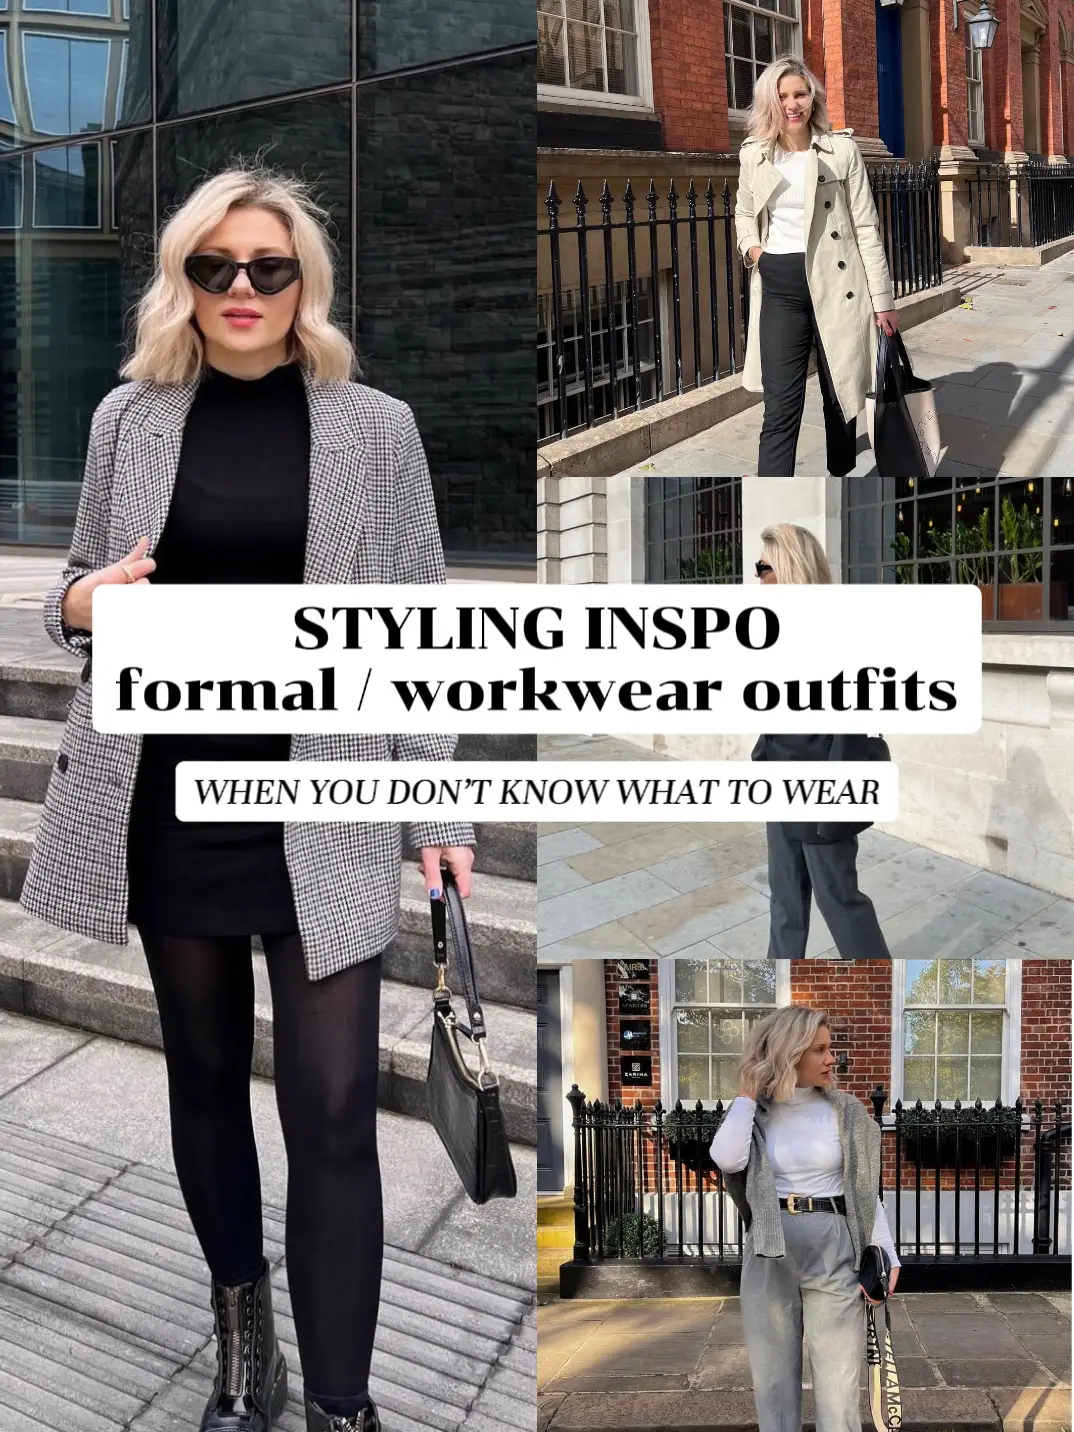 37 Fancy Work Outfits Ideas With Black Leggings To Copy Right Now  Winter  fashion outfits casual, Outfits with leggings, Fall outfits women